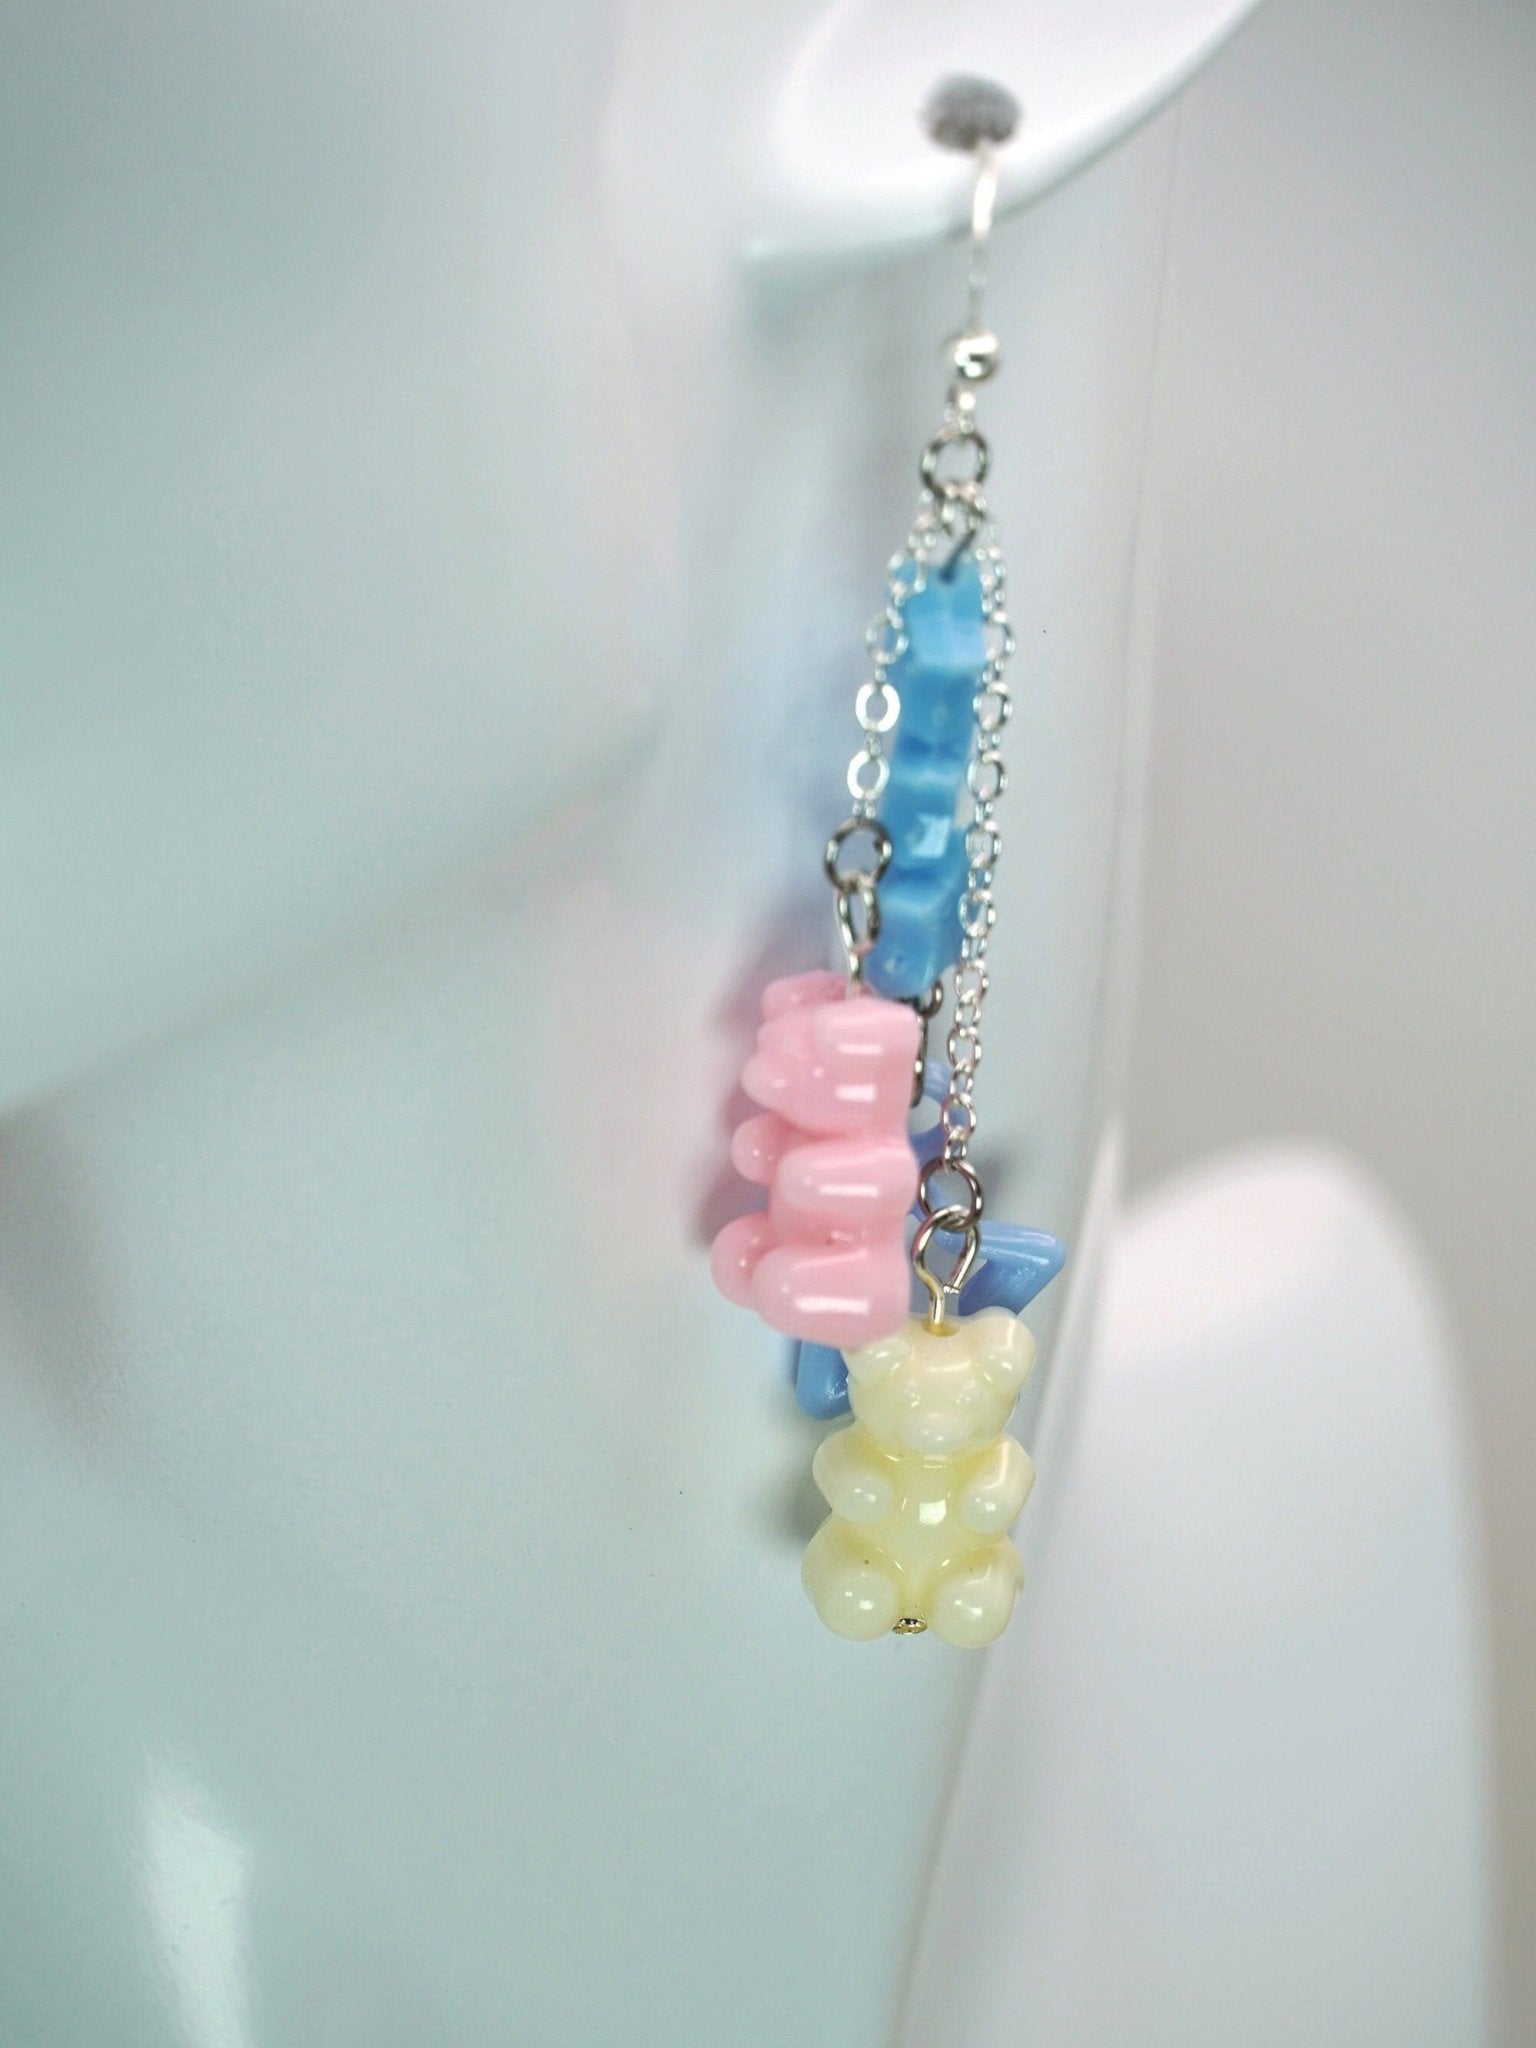 Trans Pride Pastel Gummy Bear Earrings, Trans Flag Colors, Pink and White Gummy Bears on Silver Chains, LGBT, Trans Pride Earrings - Dekowaii Jewelry Company